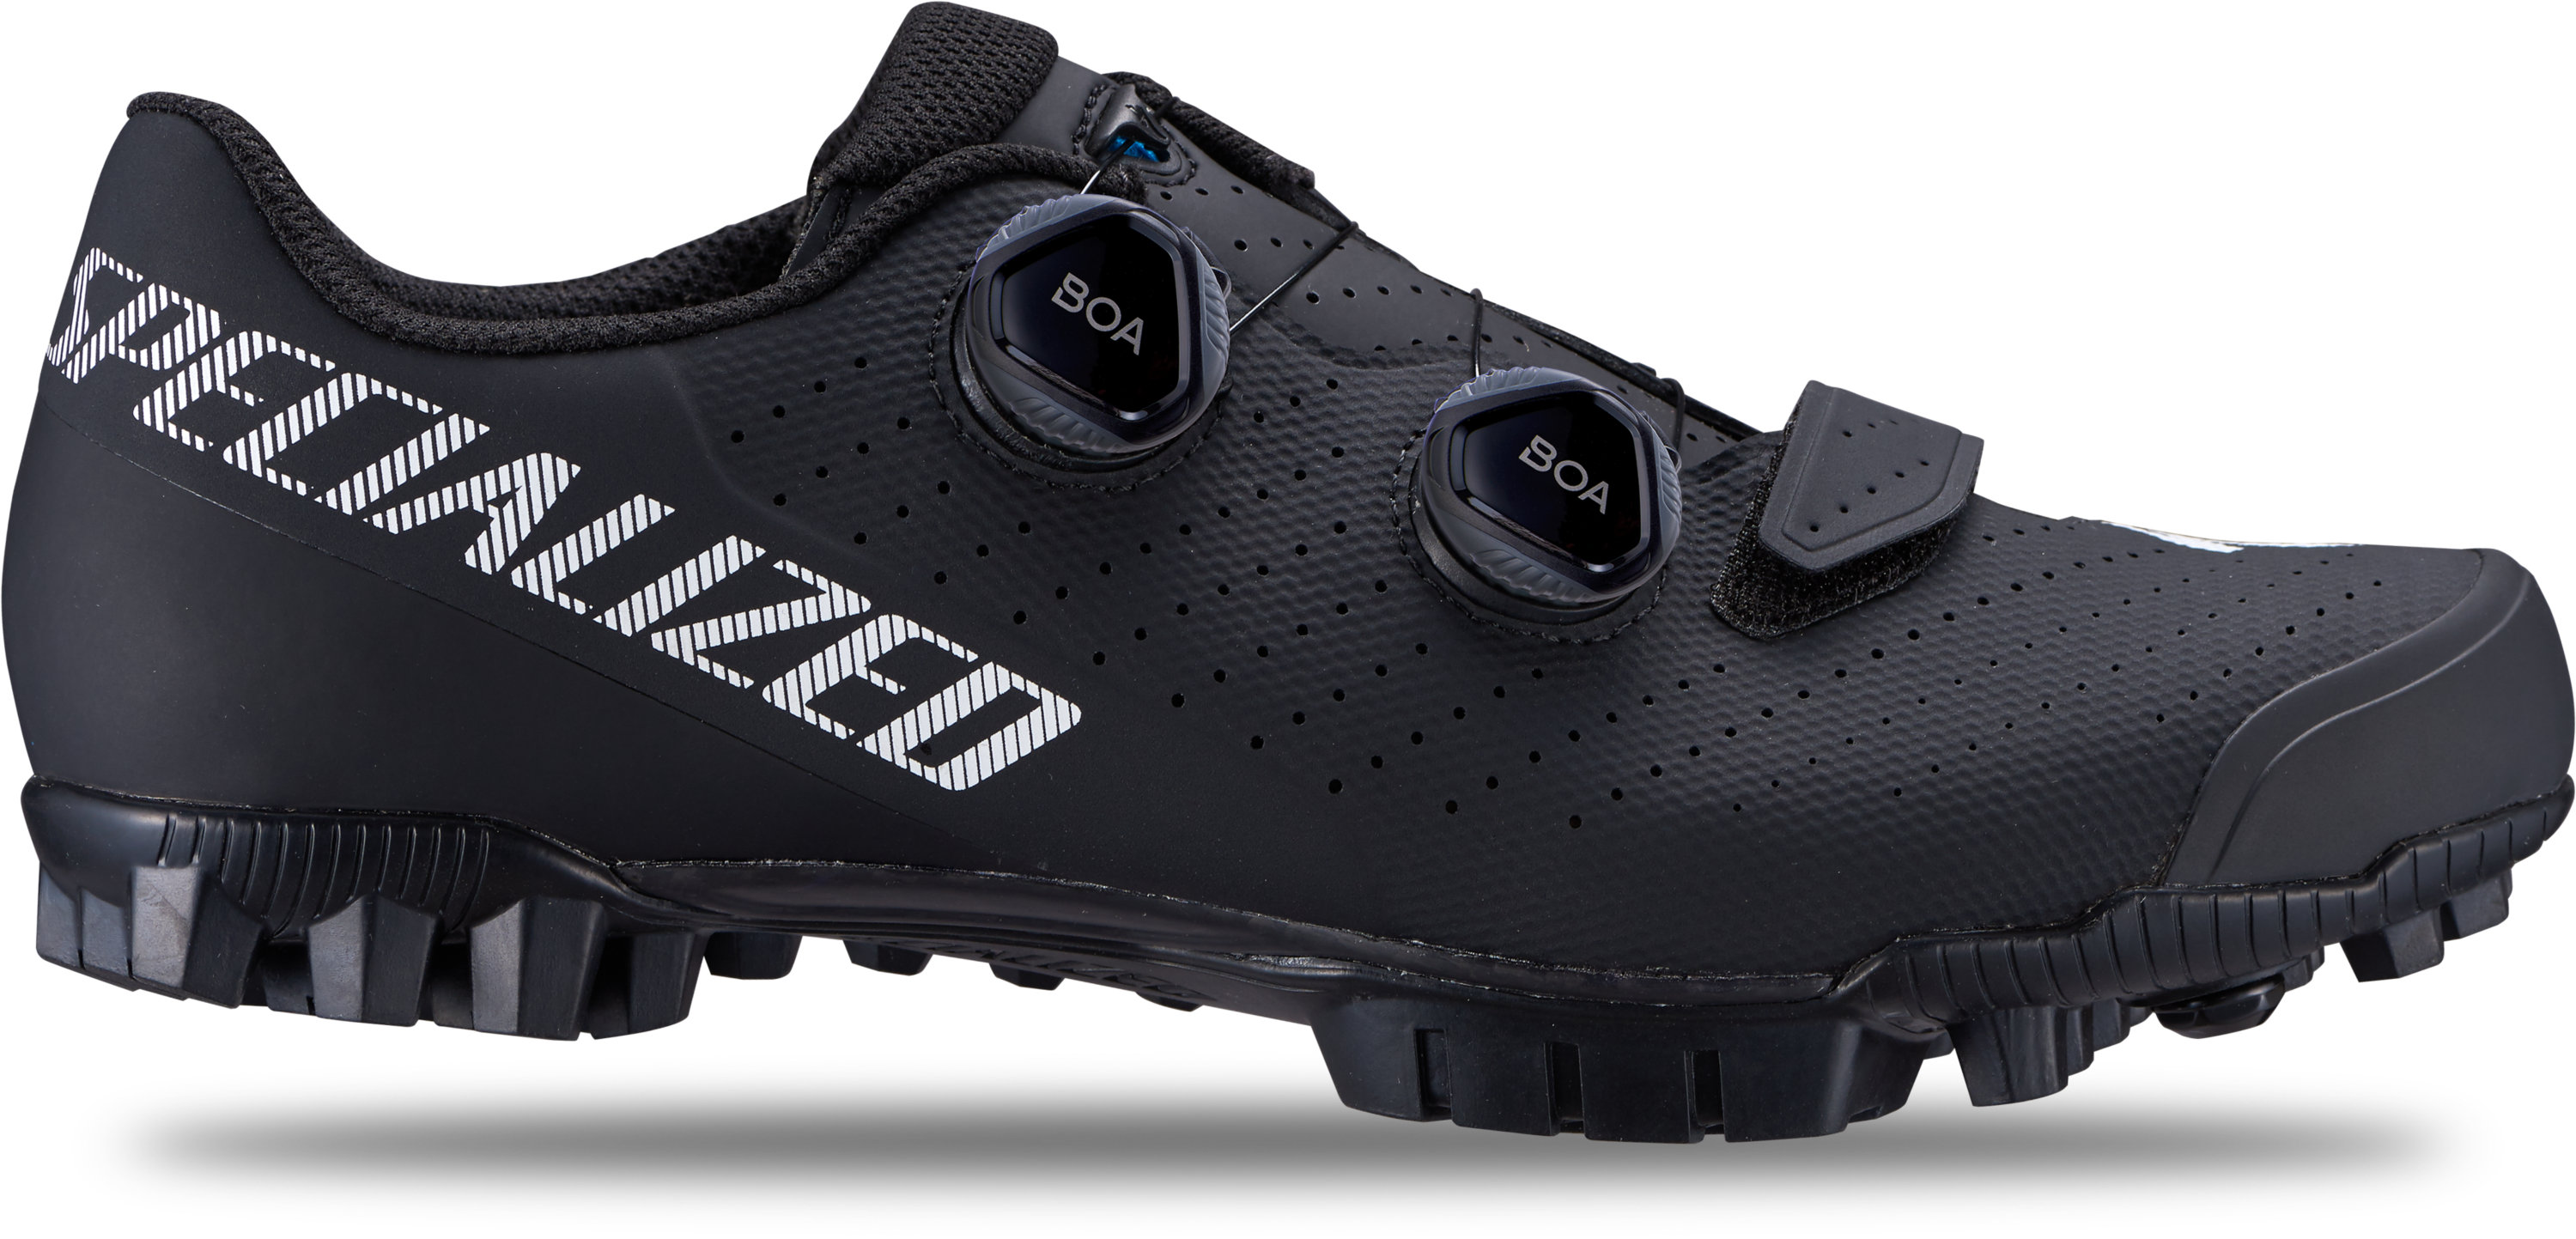 specialized recon 3.0 mountain bike shoes